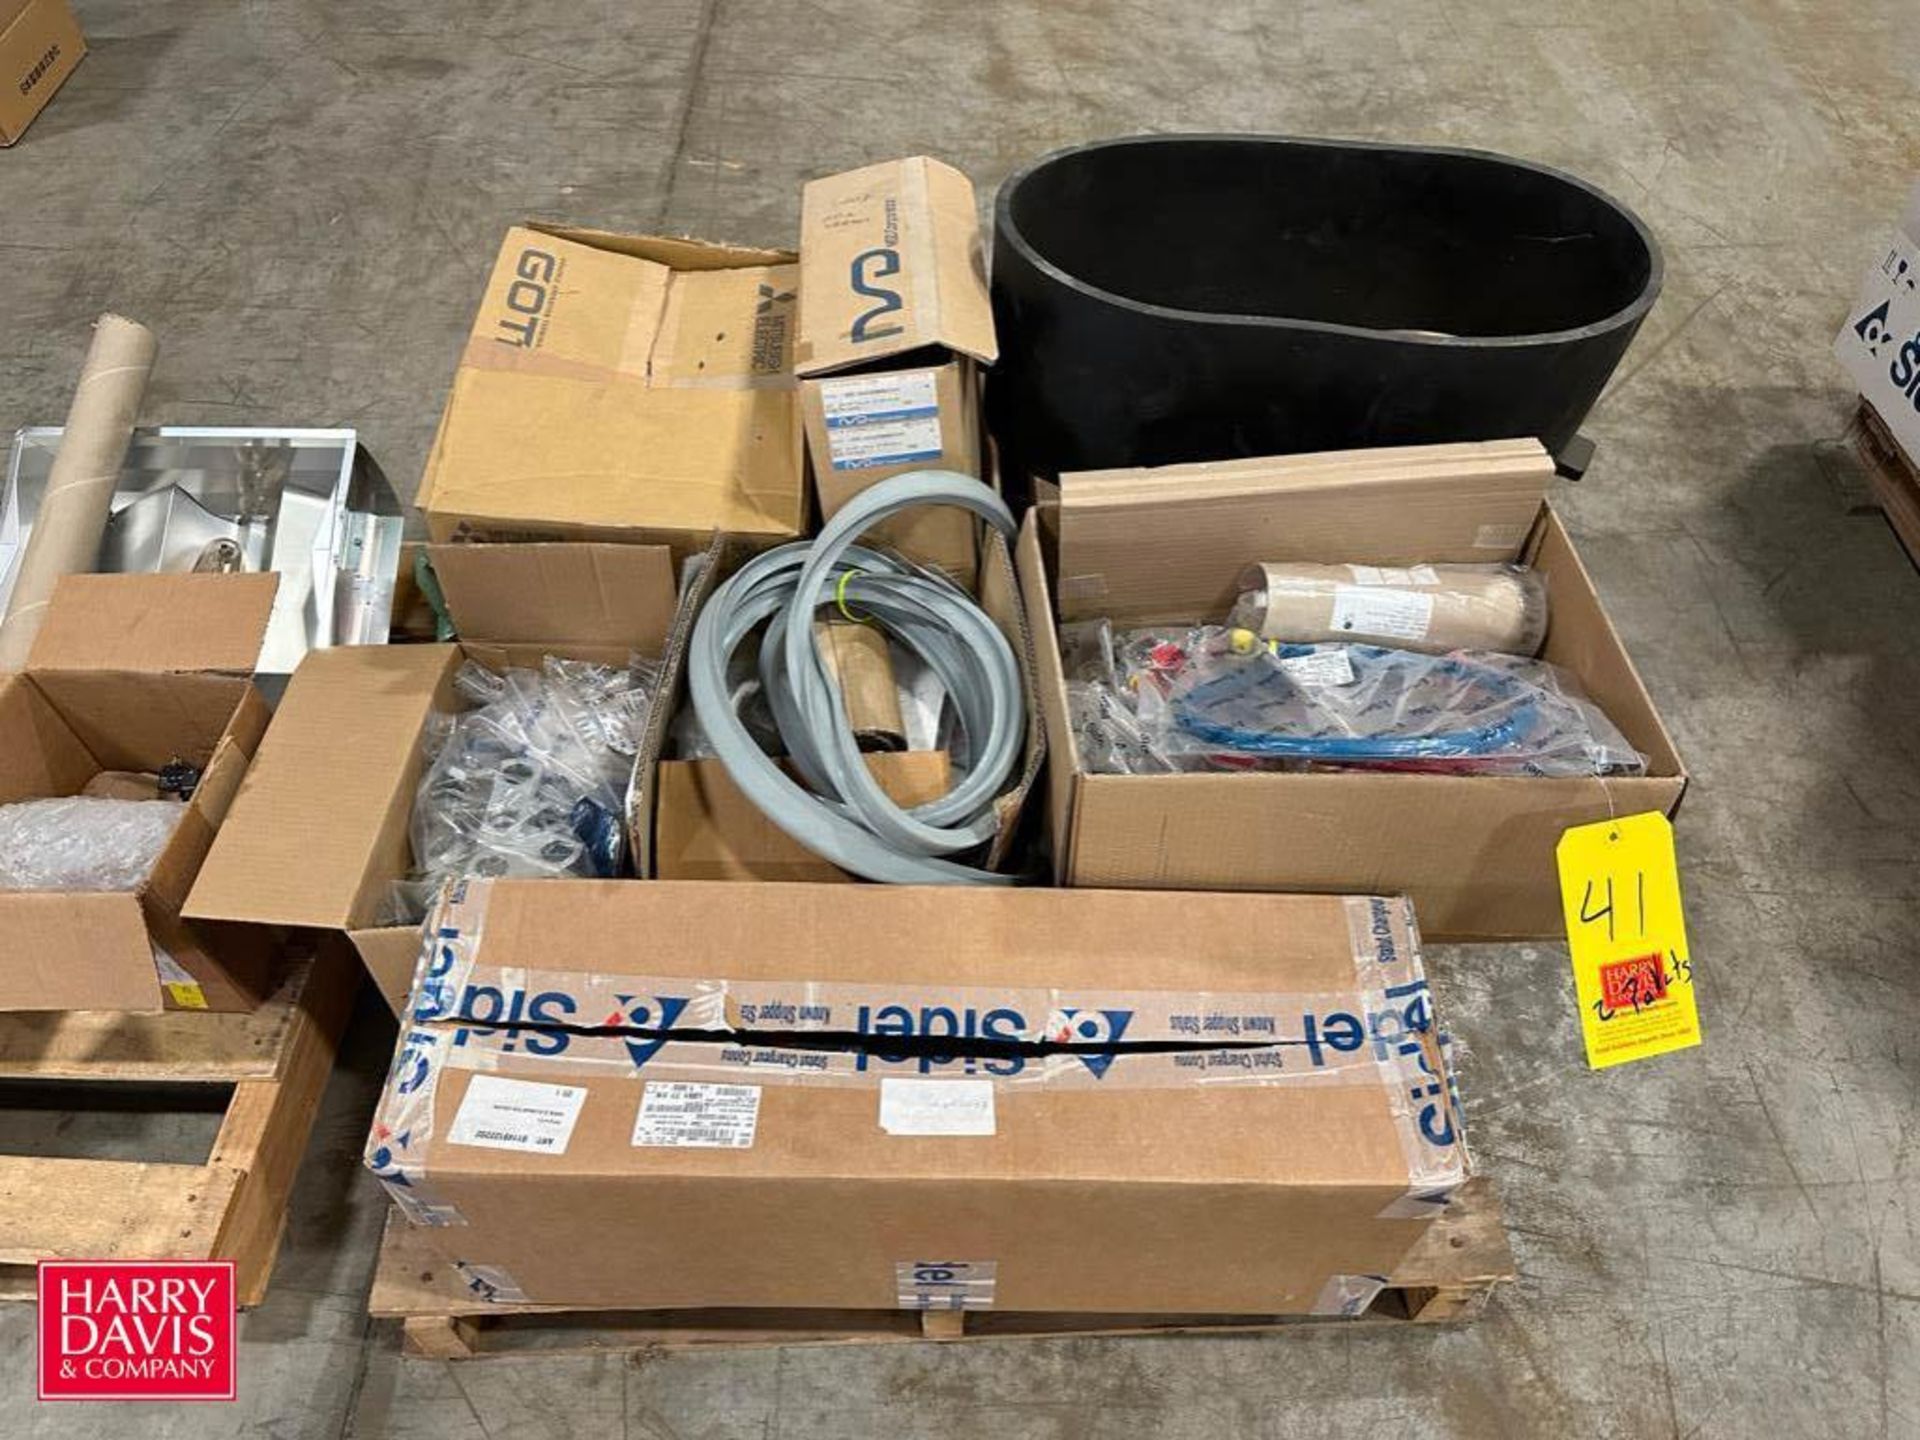 NEW Assorted Sidel Parts, Including: Gaskets, Light Bulbs, Light Housing, Tubing and Cables